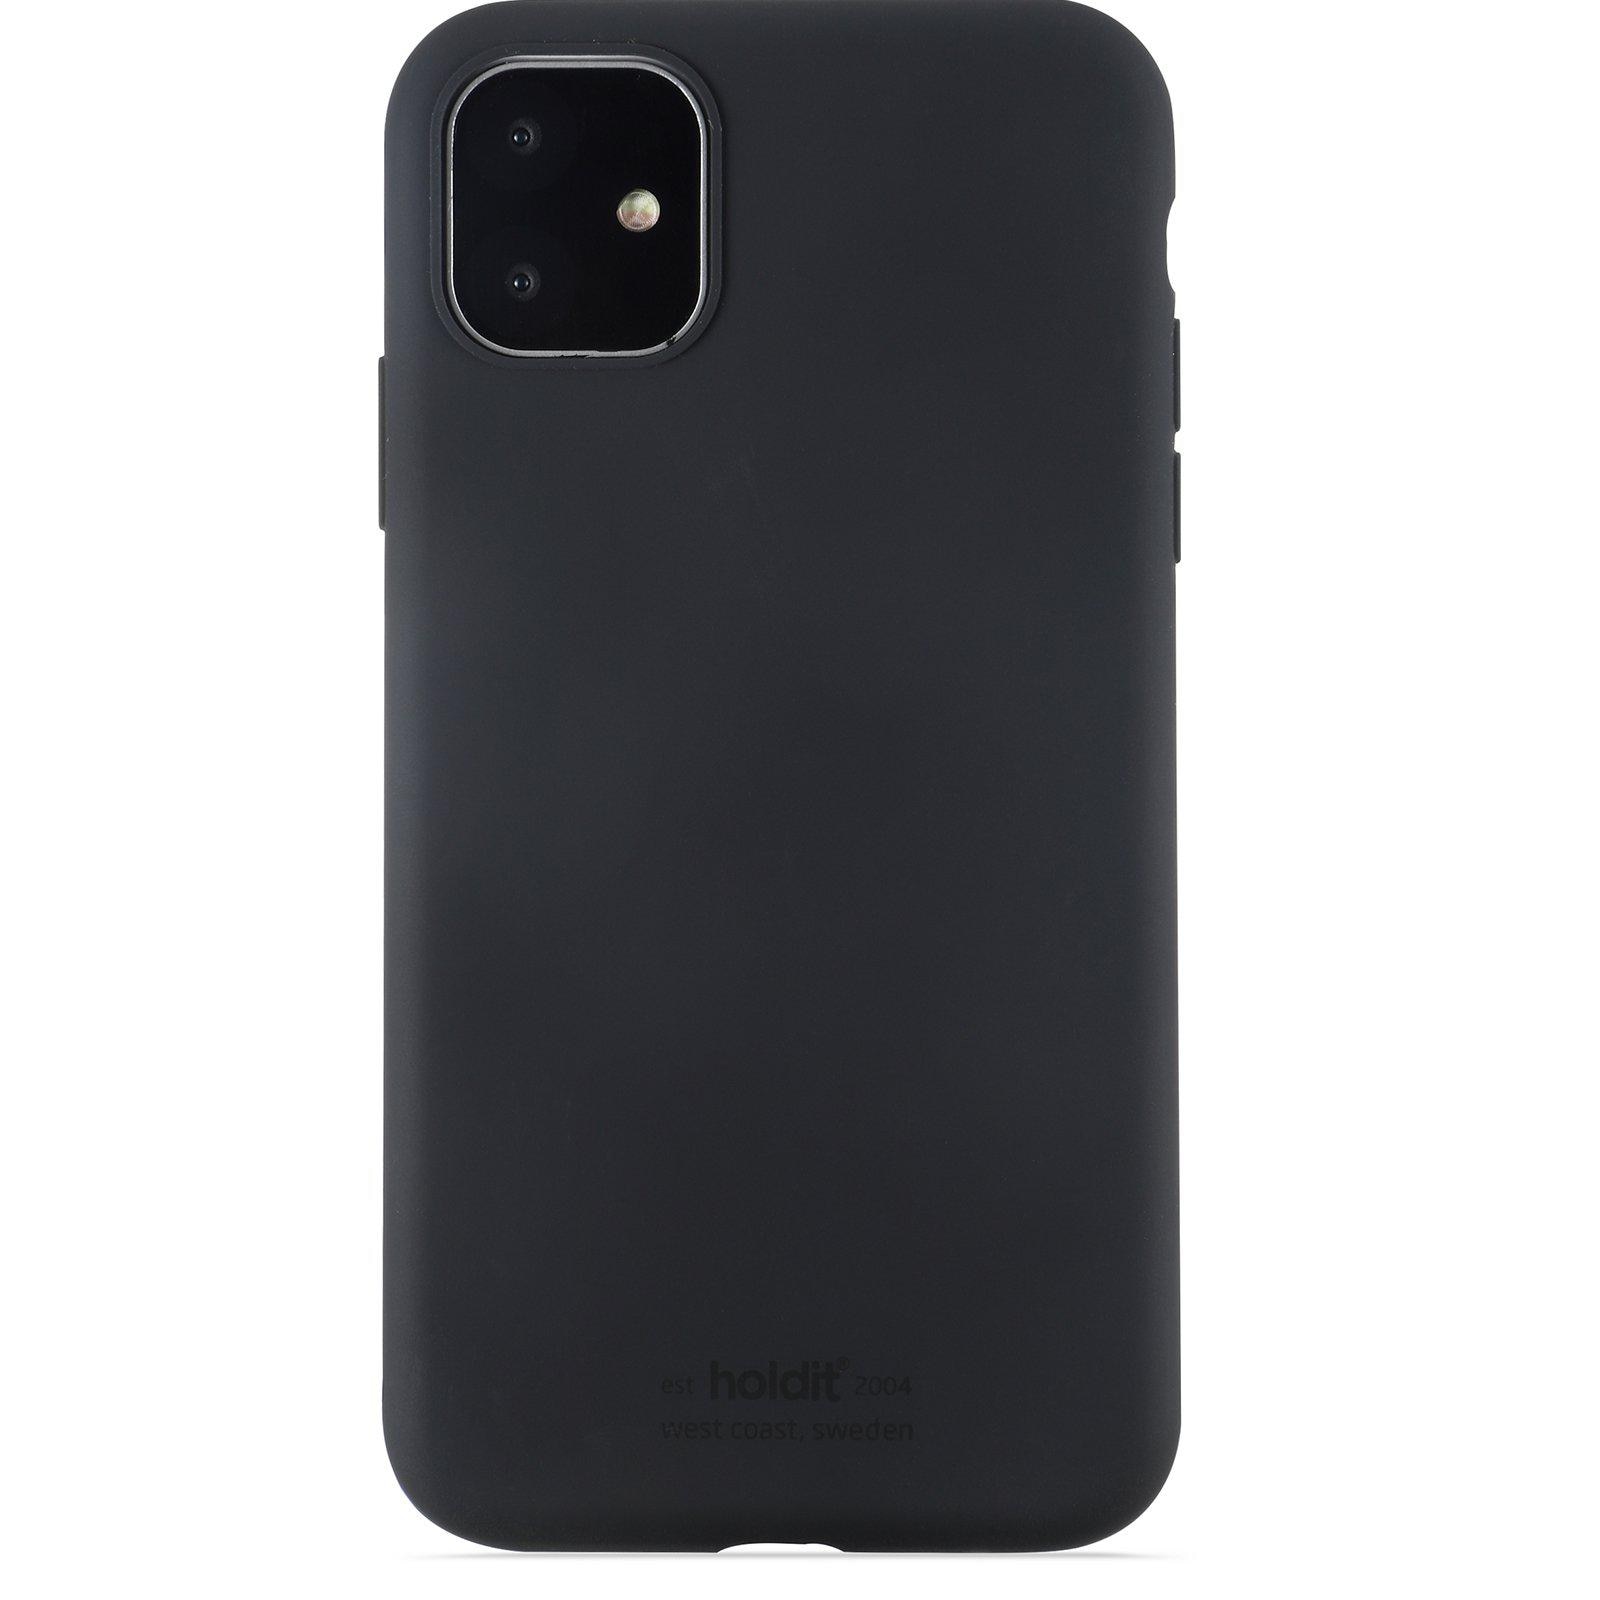 iPhone 11/XR Silicone Case, Black